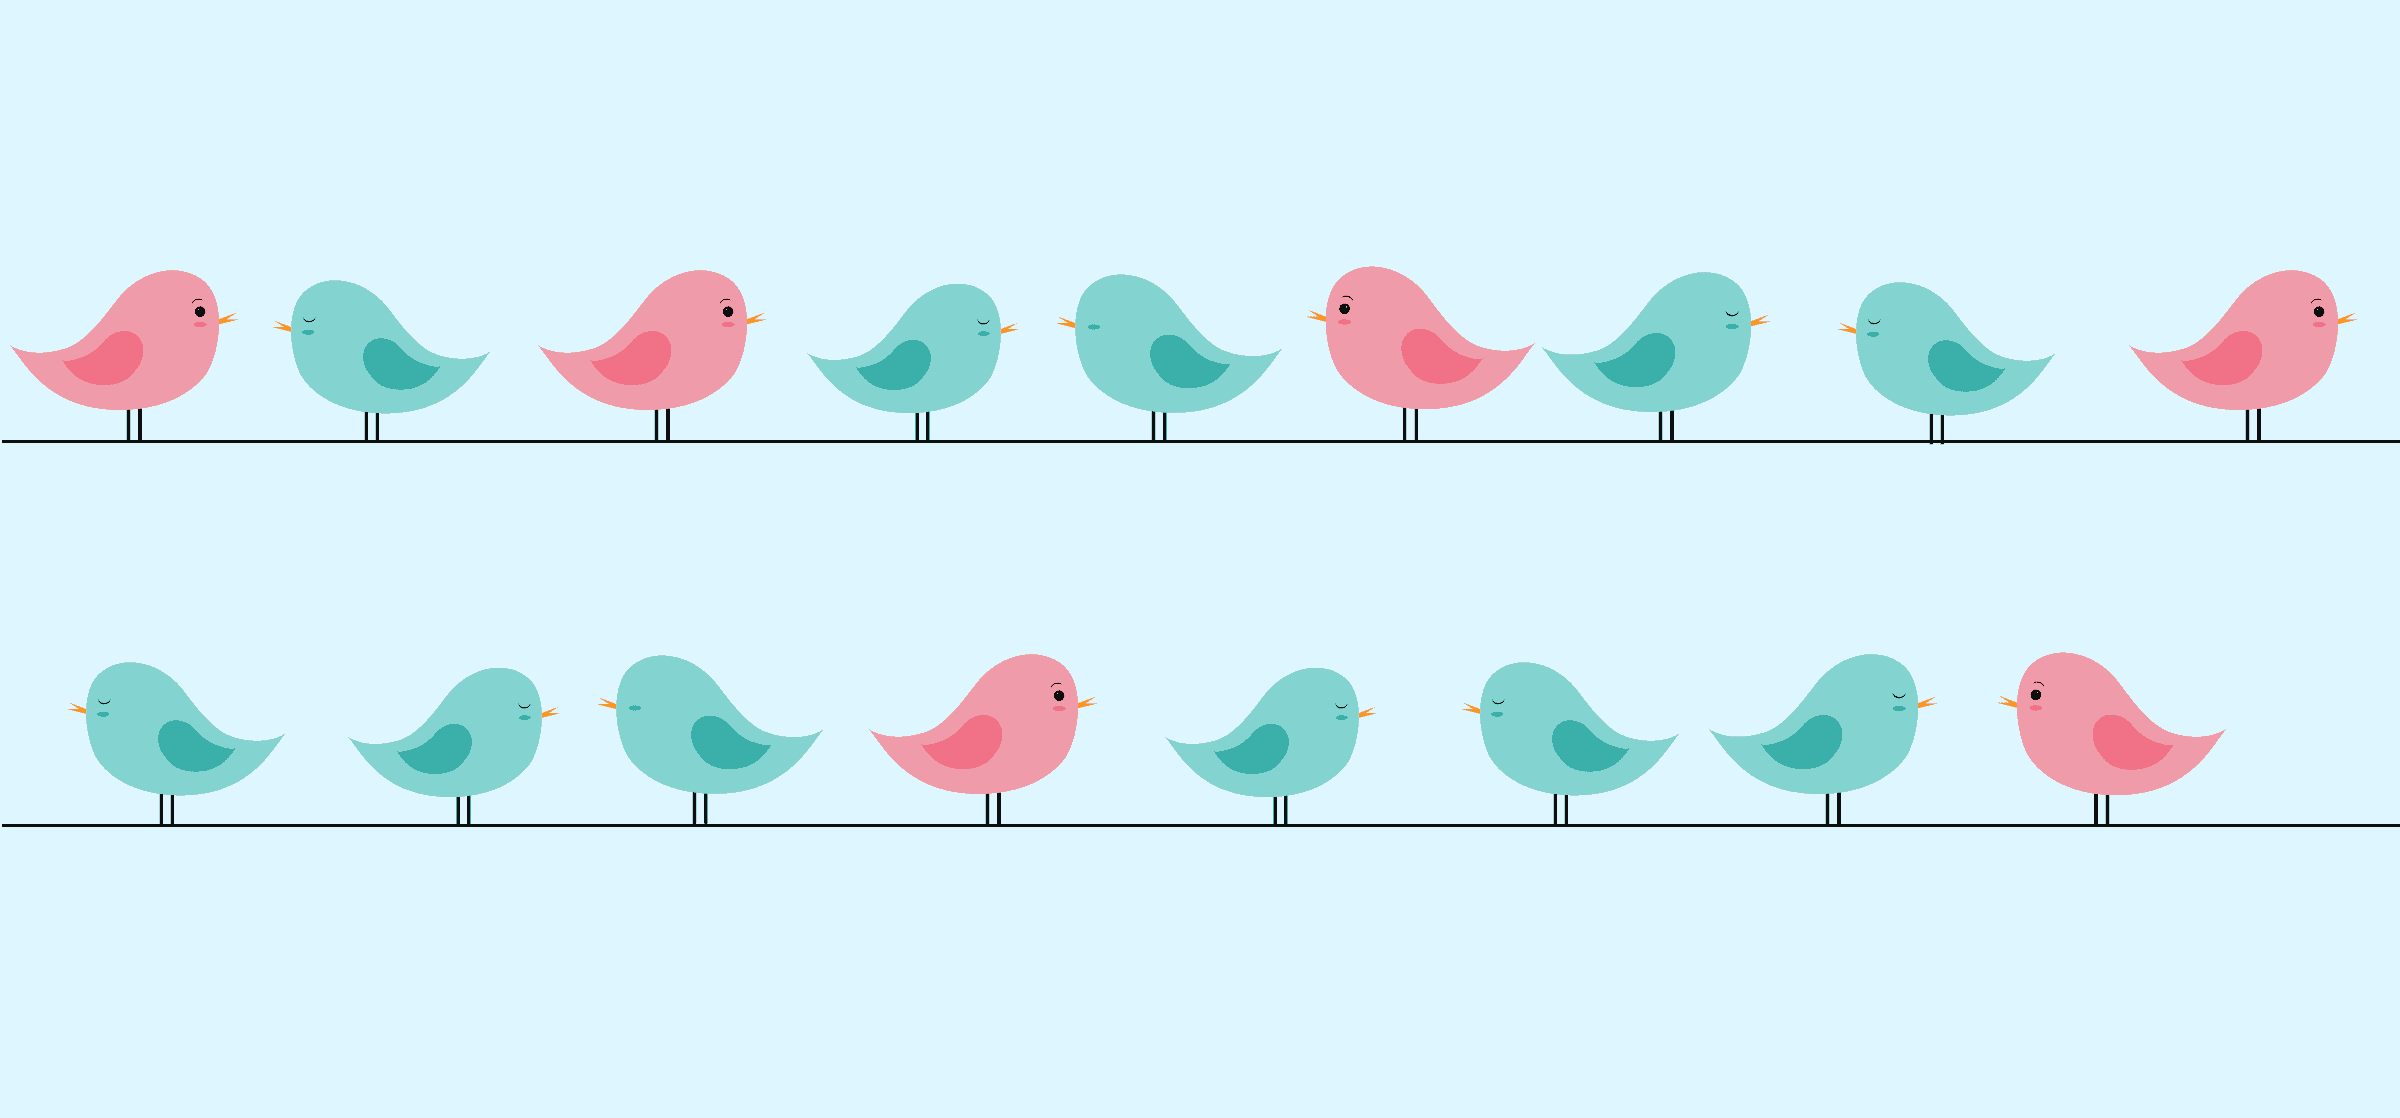 A group of birds of different colours, representing project prioritization.